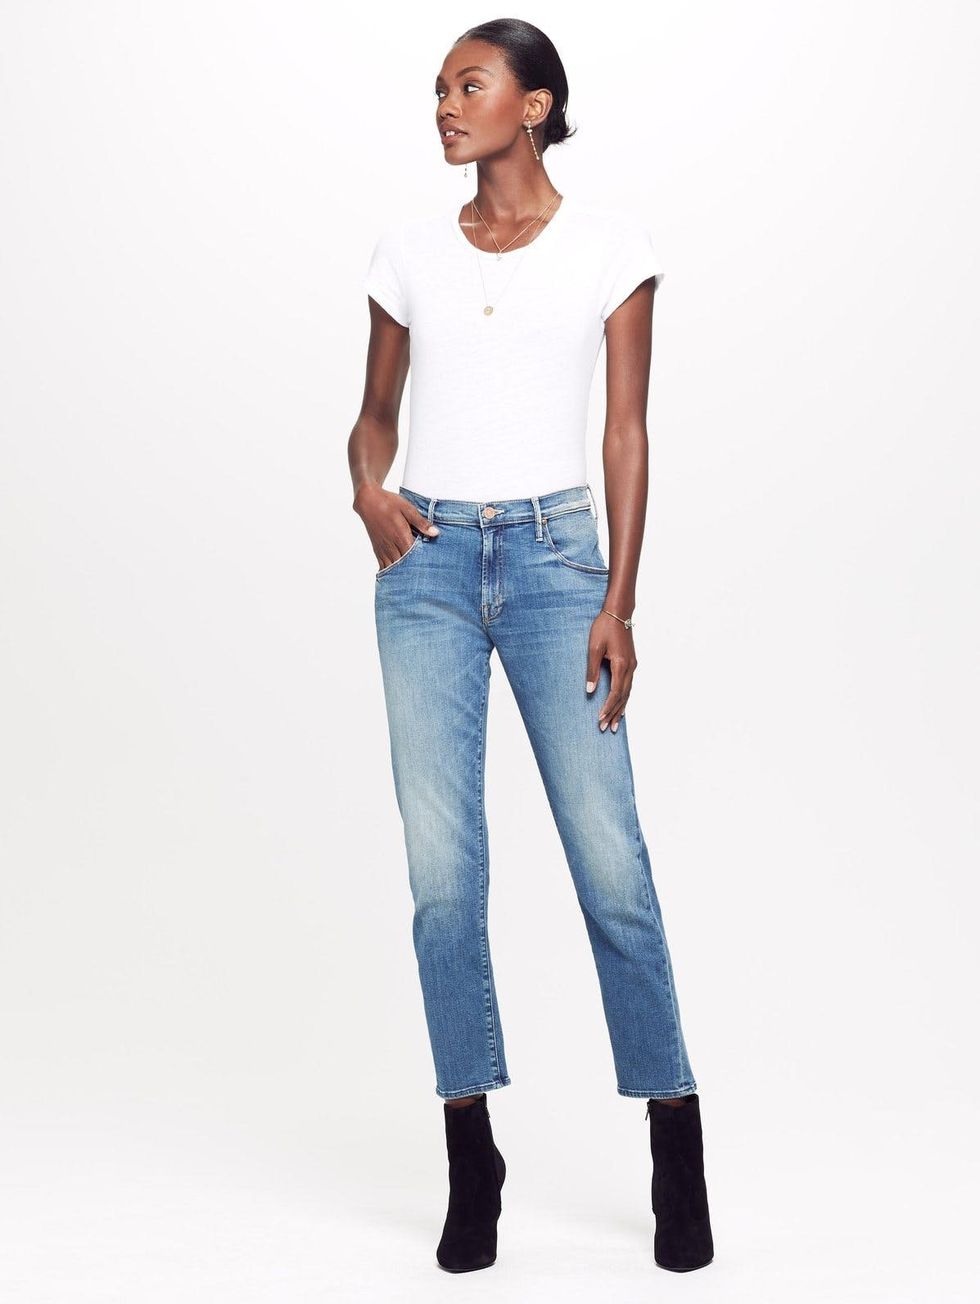 16 Fresh Denim Buys for Spring That Aren’t Your Typical Skinnies - Brit ...